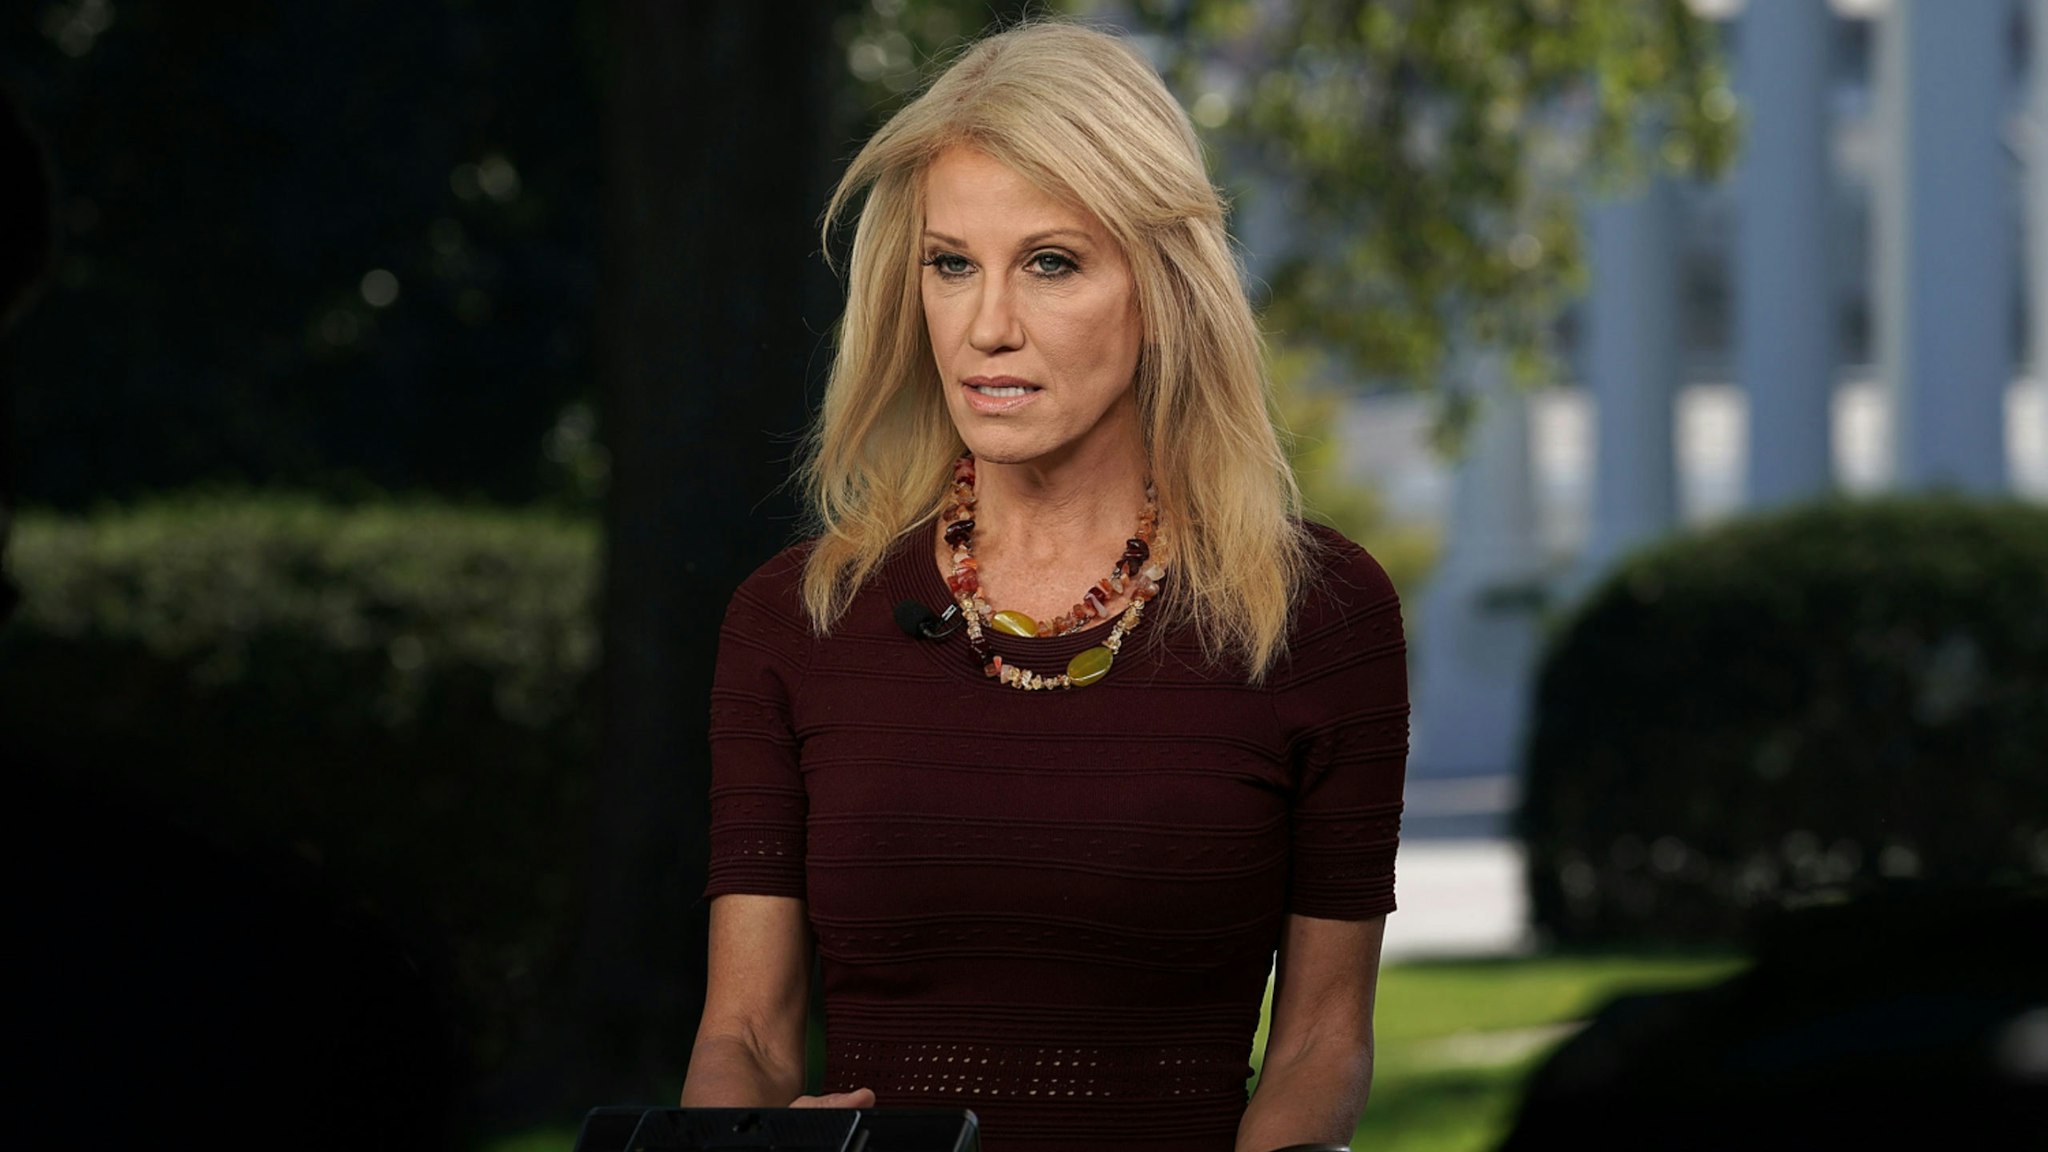 Counselor to U.S. President Donald Trump Kellyanne Conway participates in a TV interview October 3, 2018 at the White House in Washington, DC.